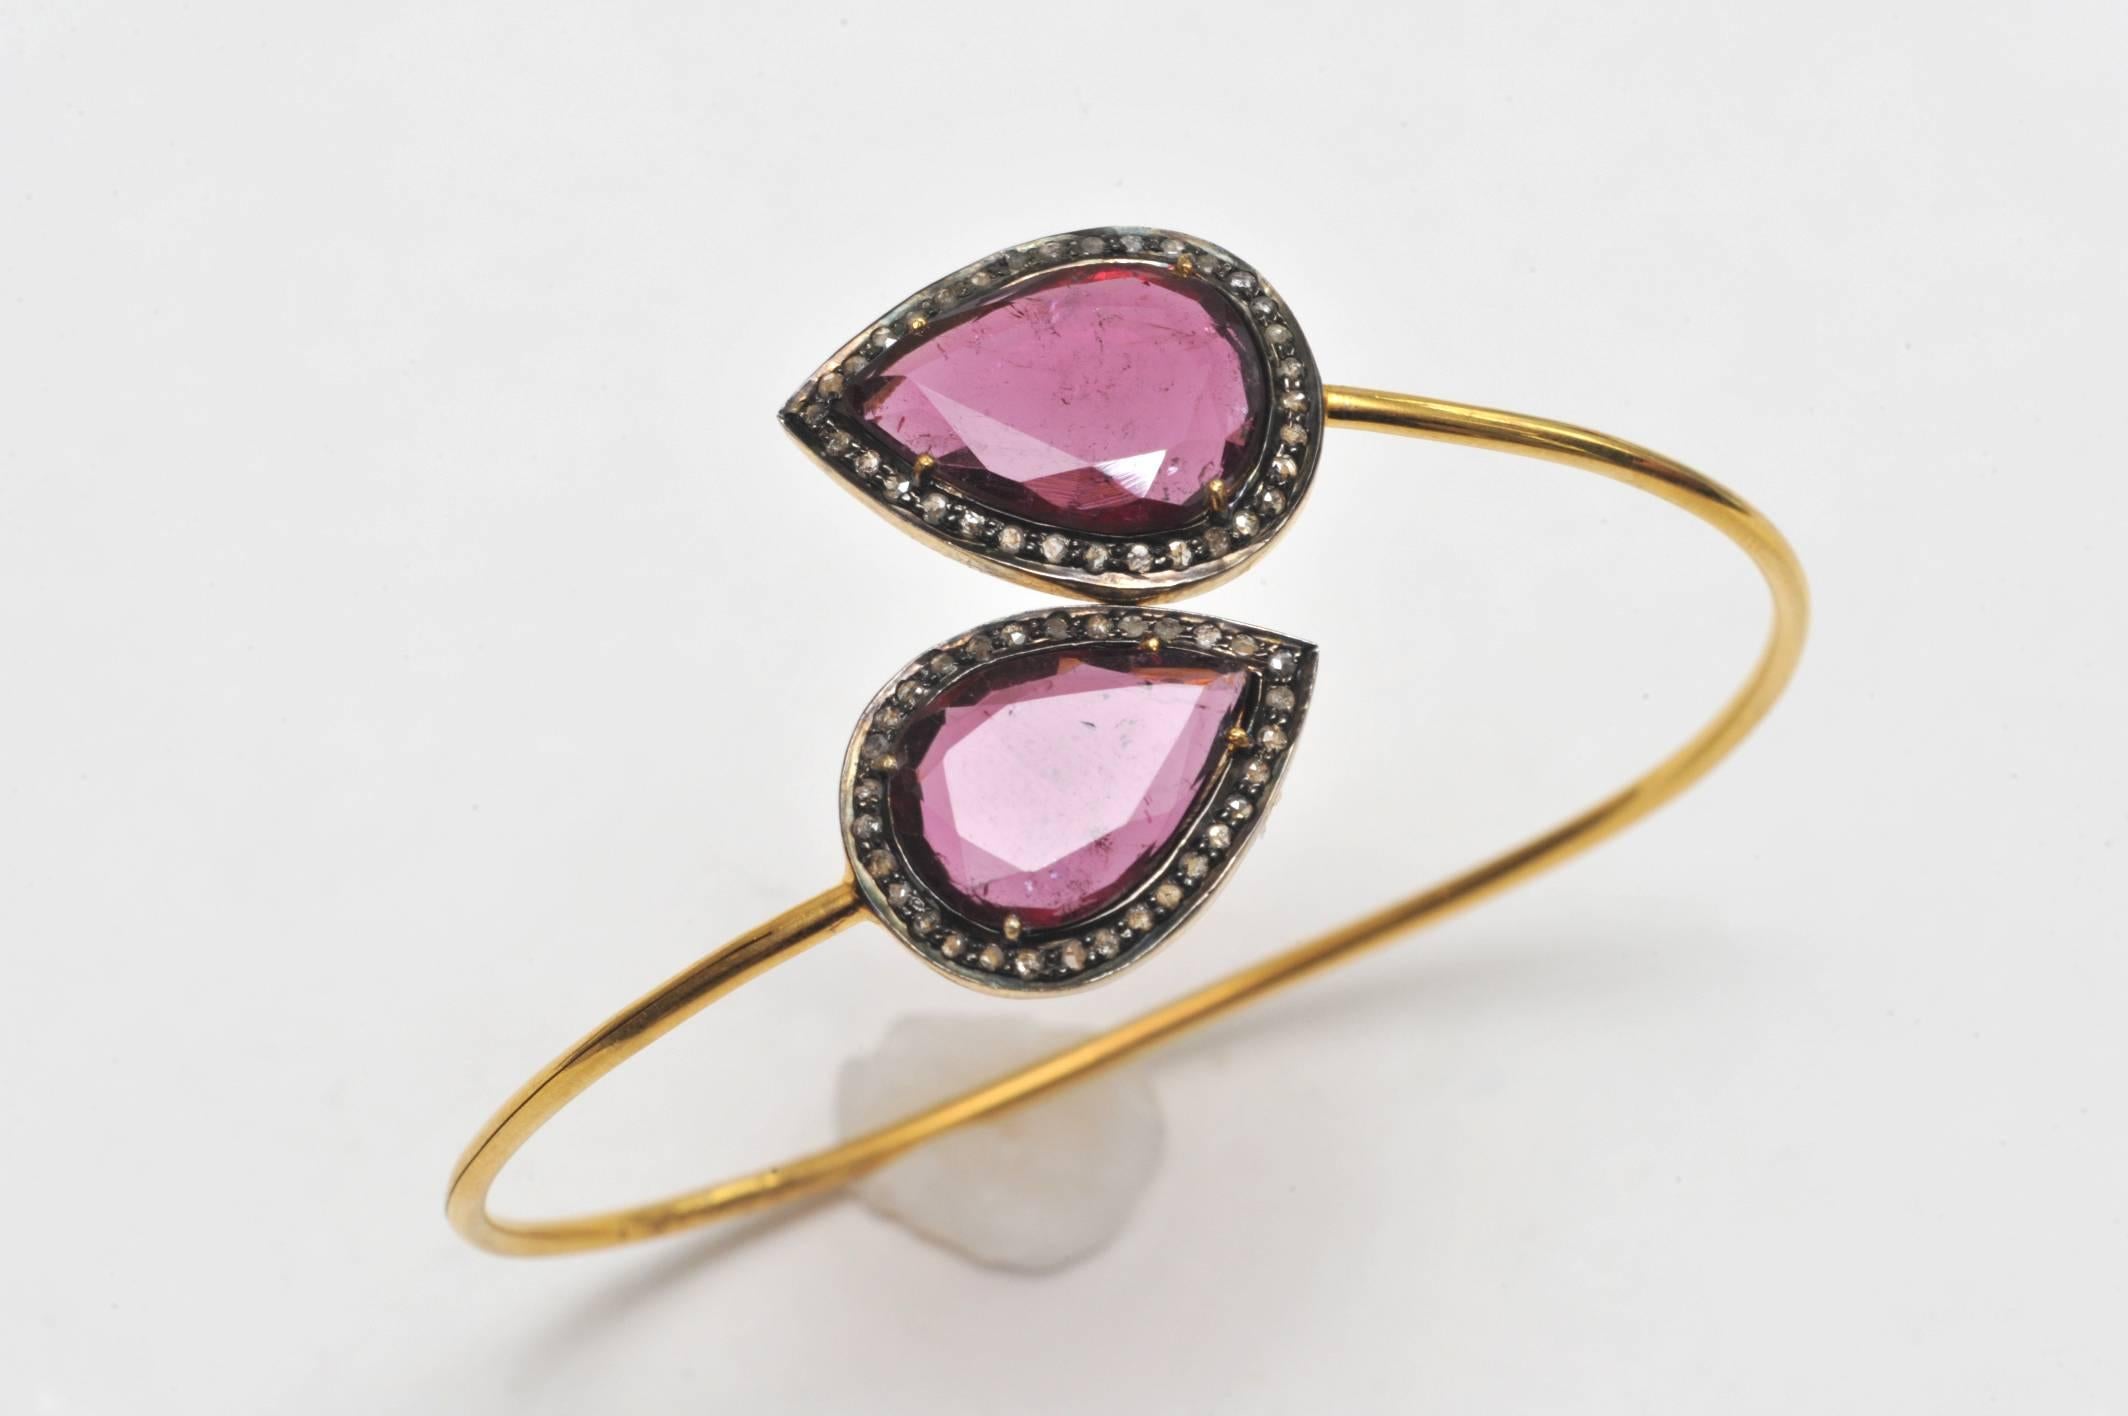 Lovely pear-shaped, faceted pink tourmaline 18K gold wrap bracelet bordered in pave`-set diamonds.  The bracelet has flexibility making it easy to get on and off and is oval shaped enduring that the stones remain on top of the wrist.  Carat weight